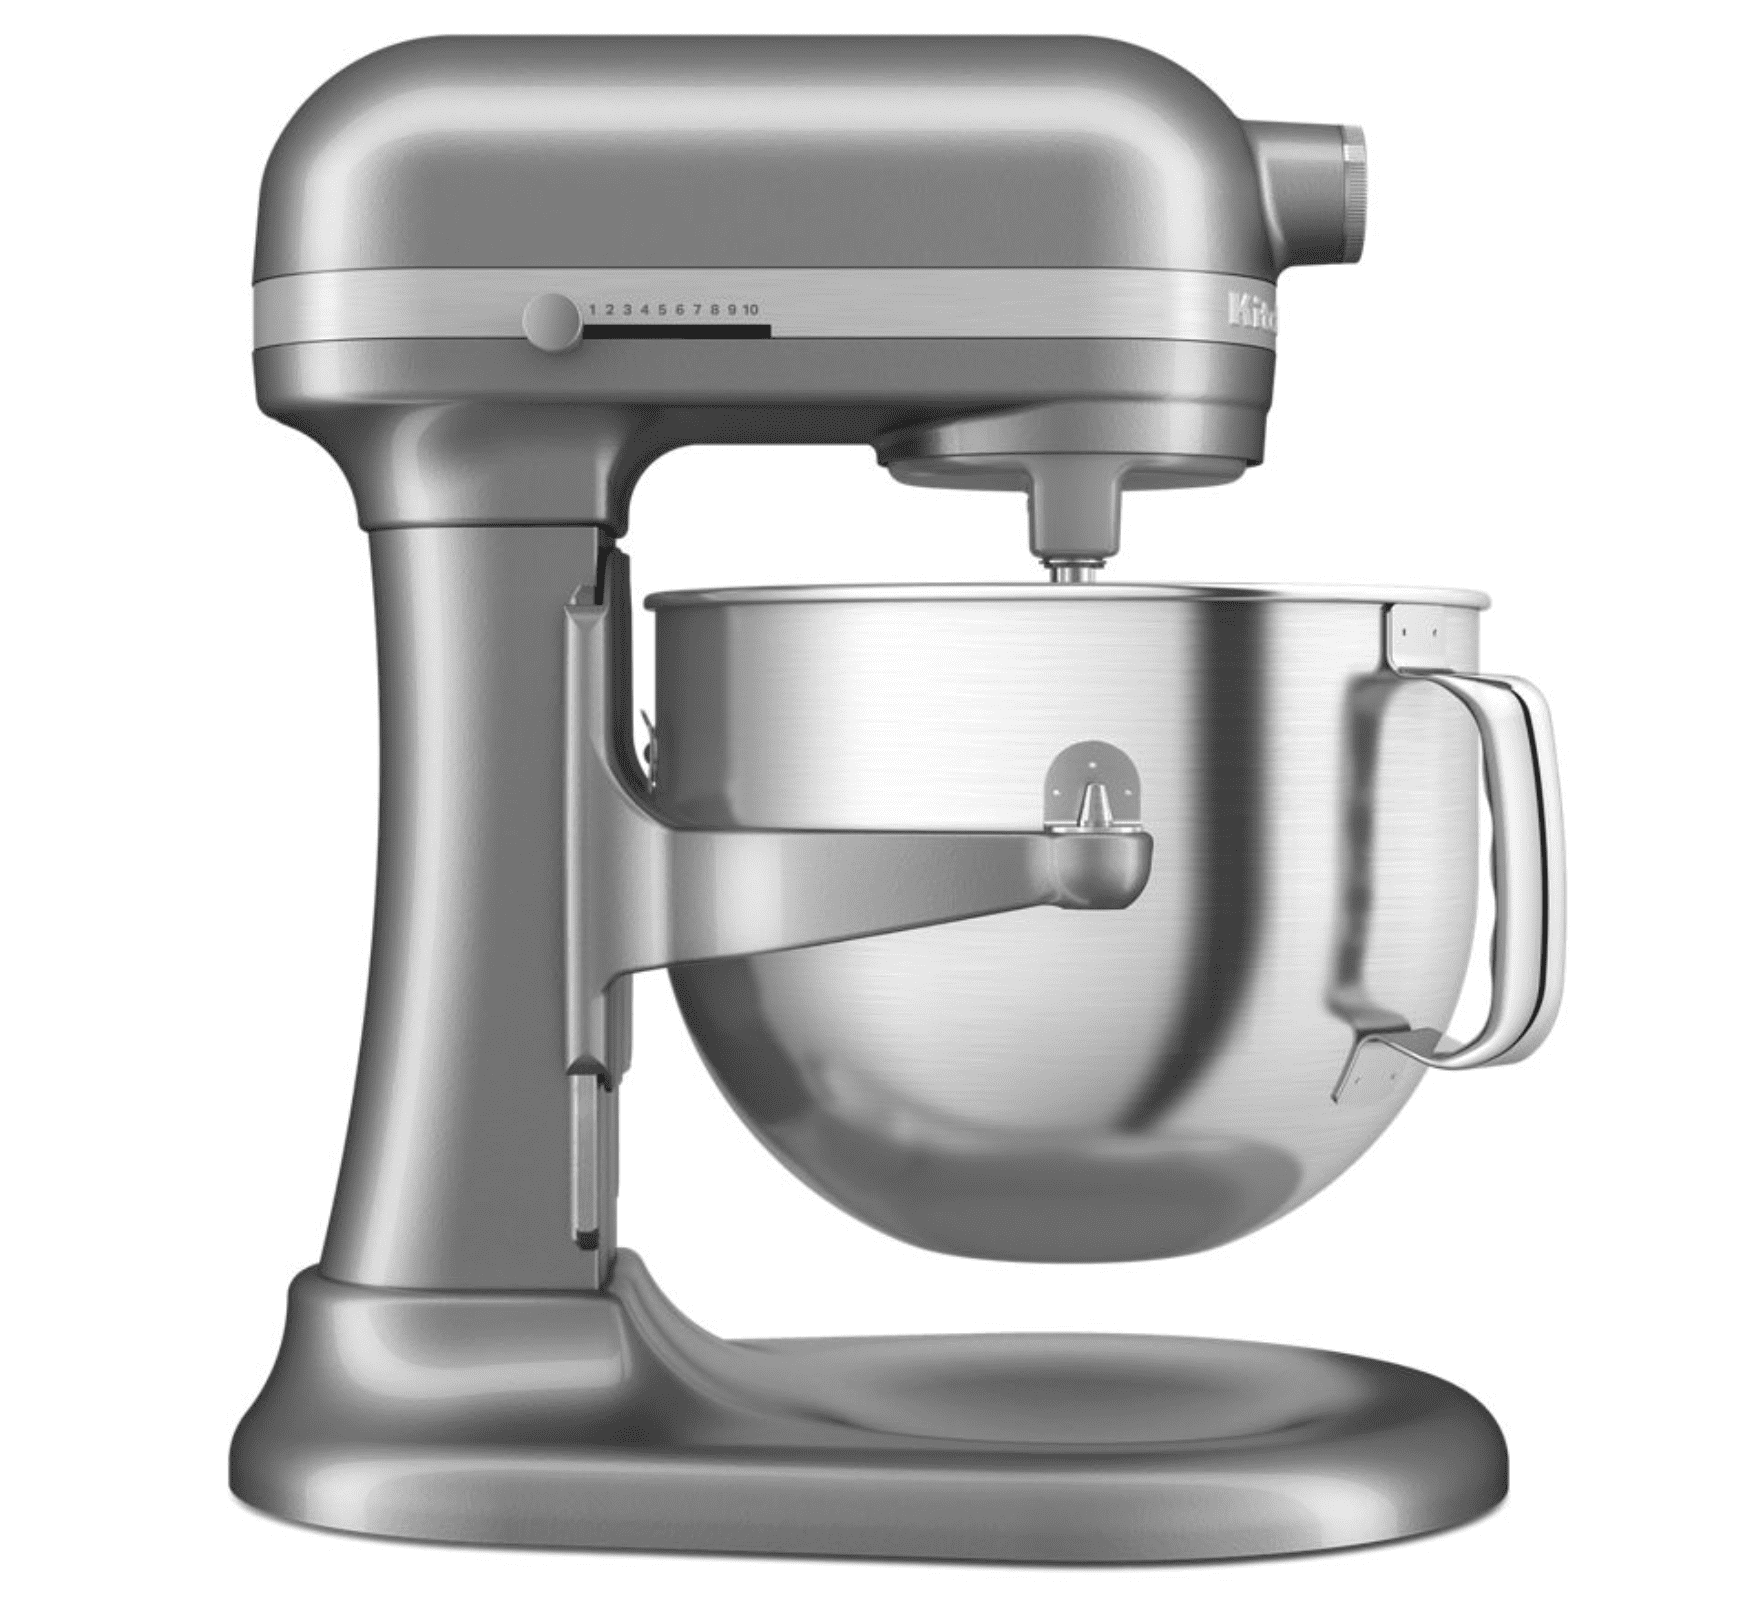 KitchenAid Stand Mixers, Appliances, & Accessories Are on Sale Ahead of  Black Friday